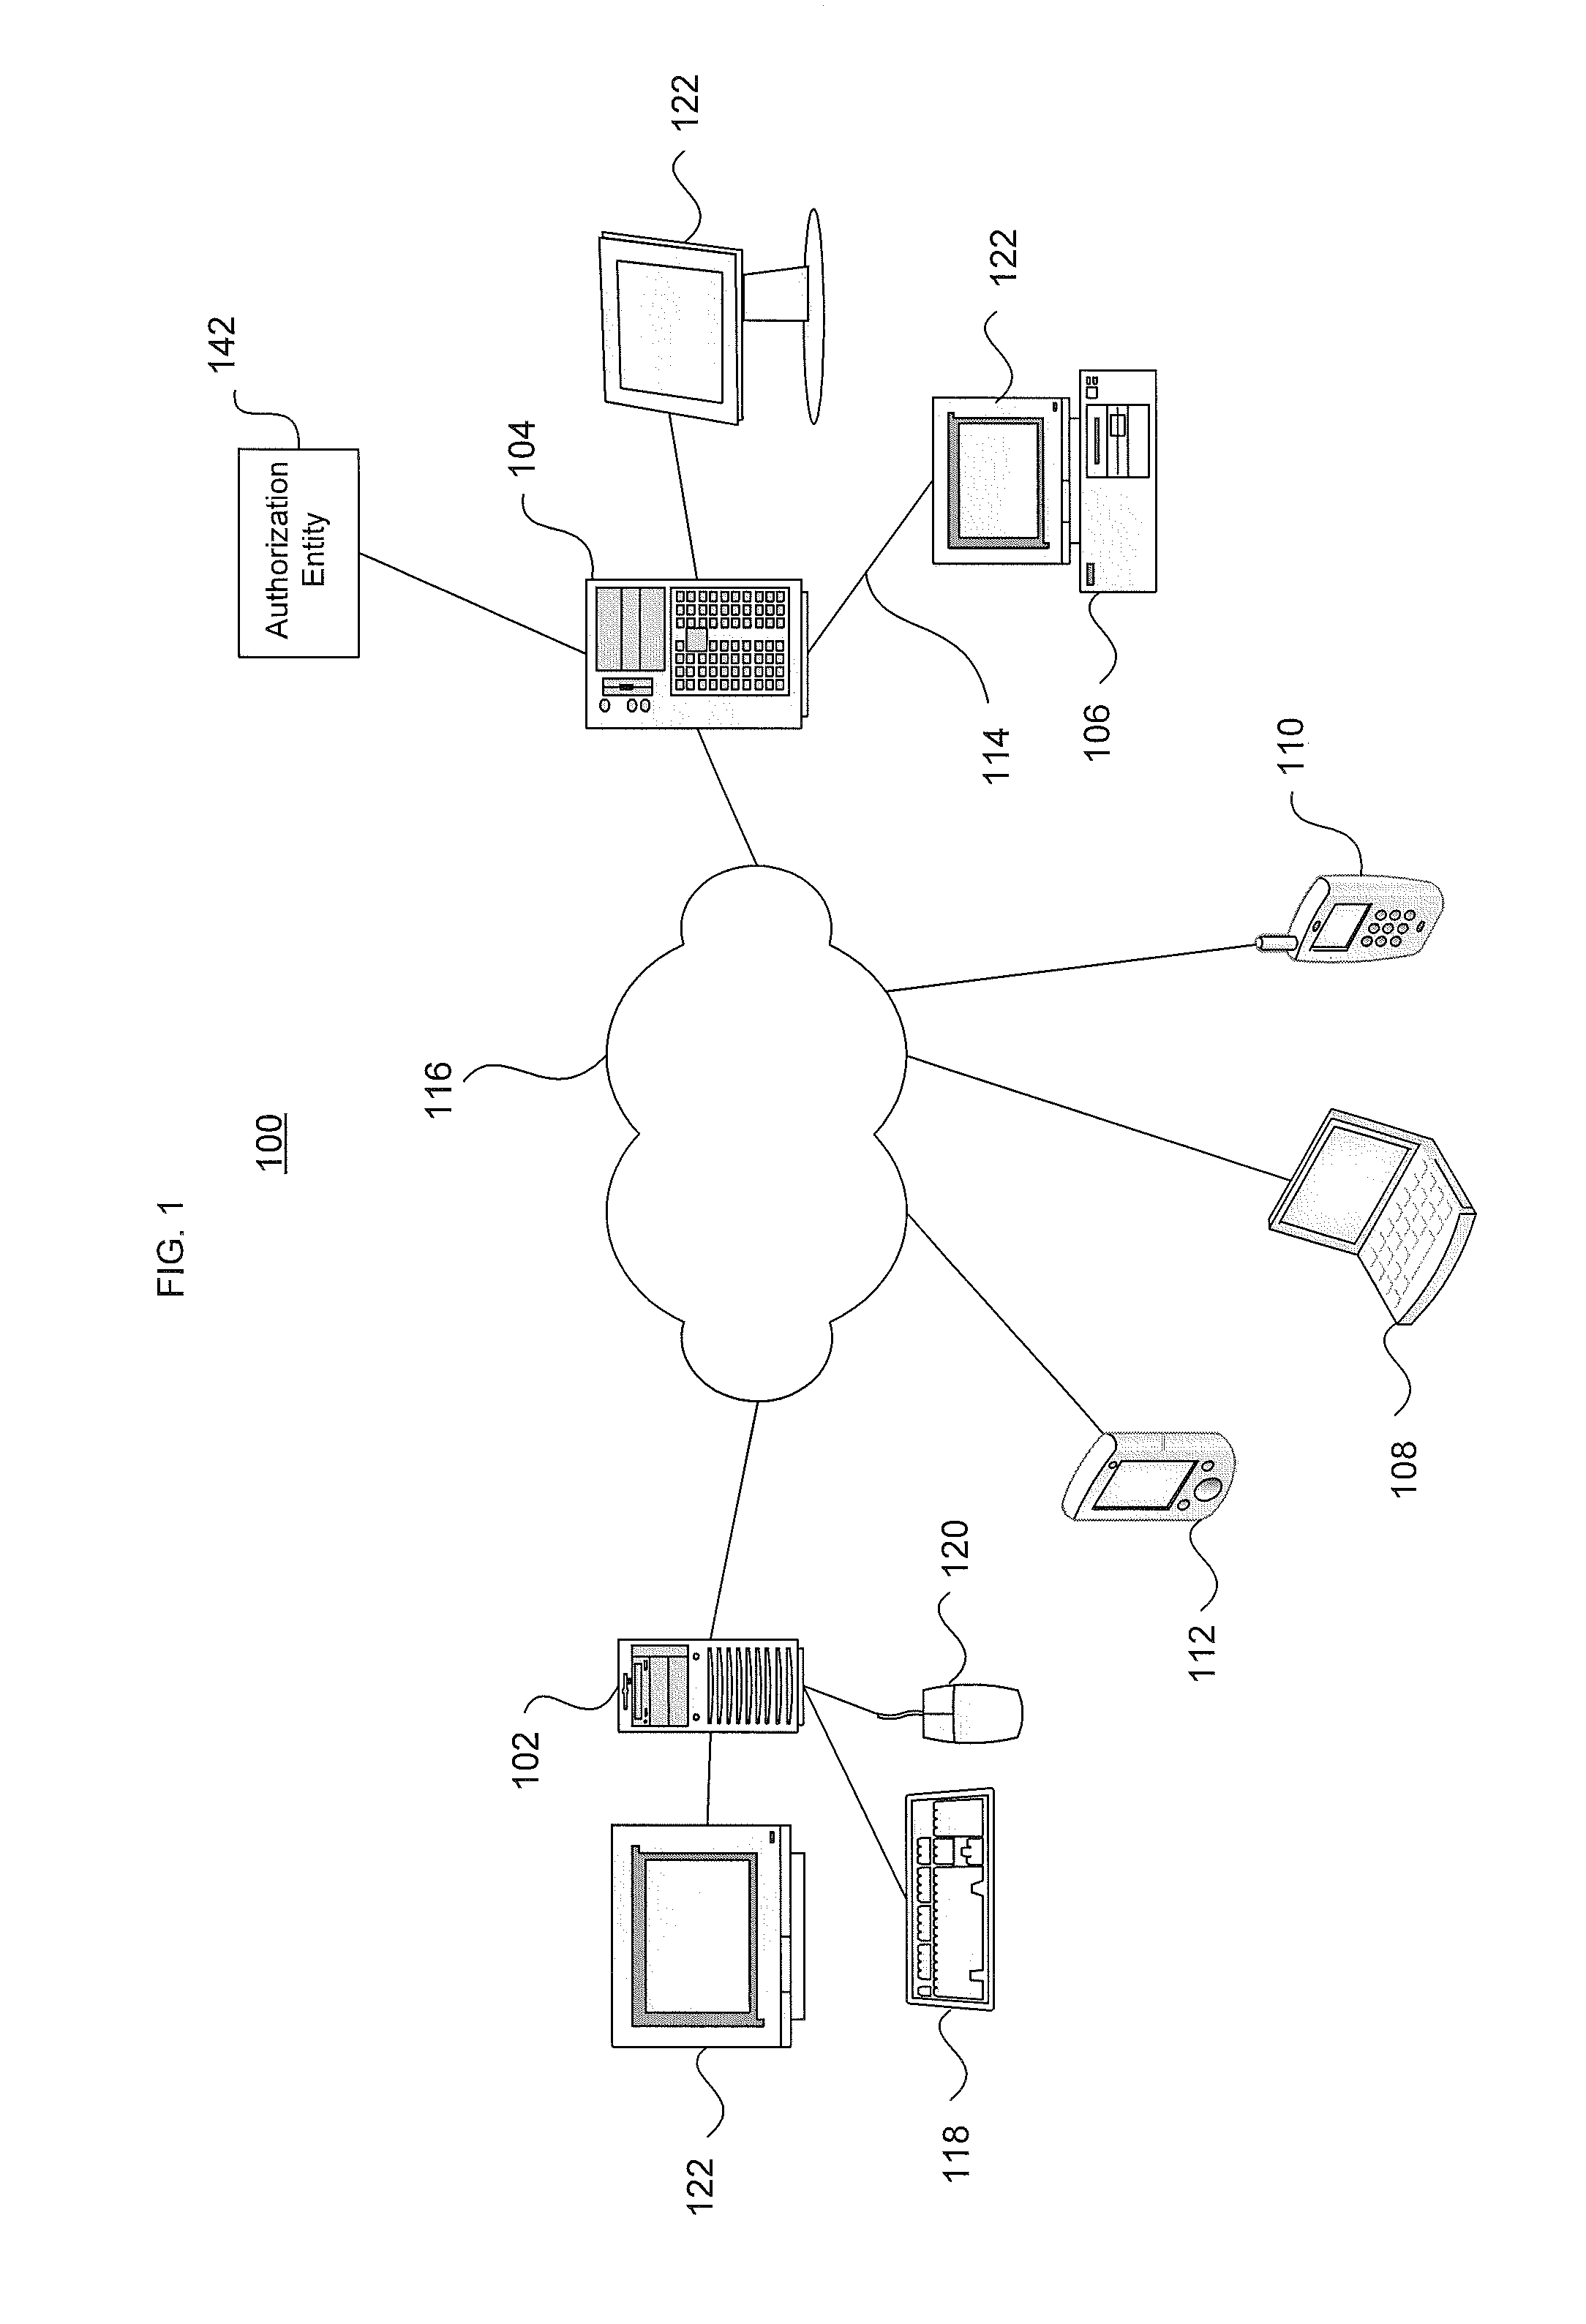 System and method for operating a computing device in a secure mode